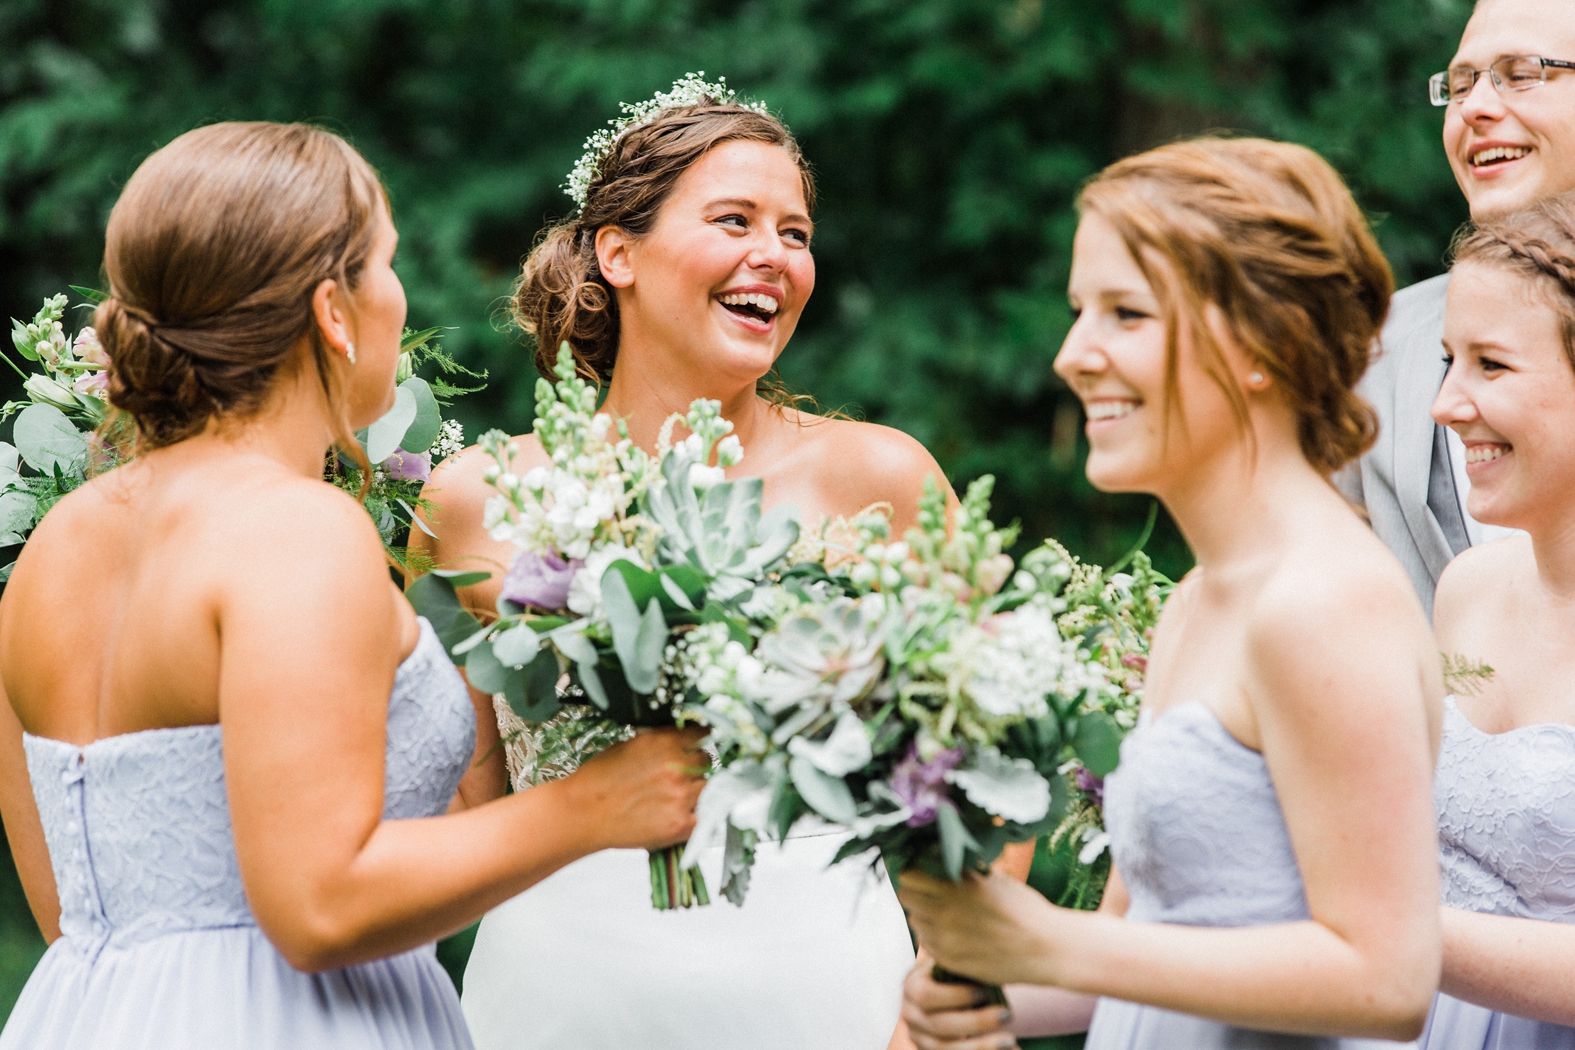 Bride in baby's breath flower crown laughing with bridesmaids in light purple lavender dresses. Purple bridesmaids bouquets with succulents and eucalyptus.